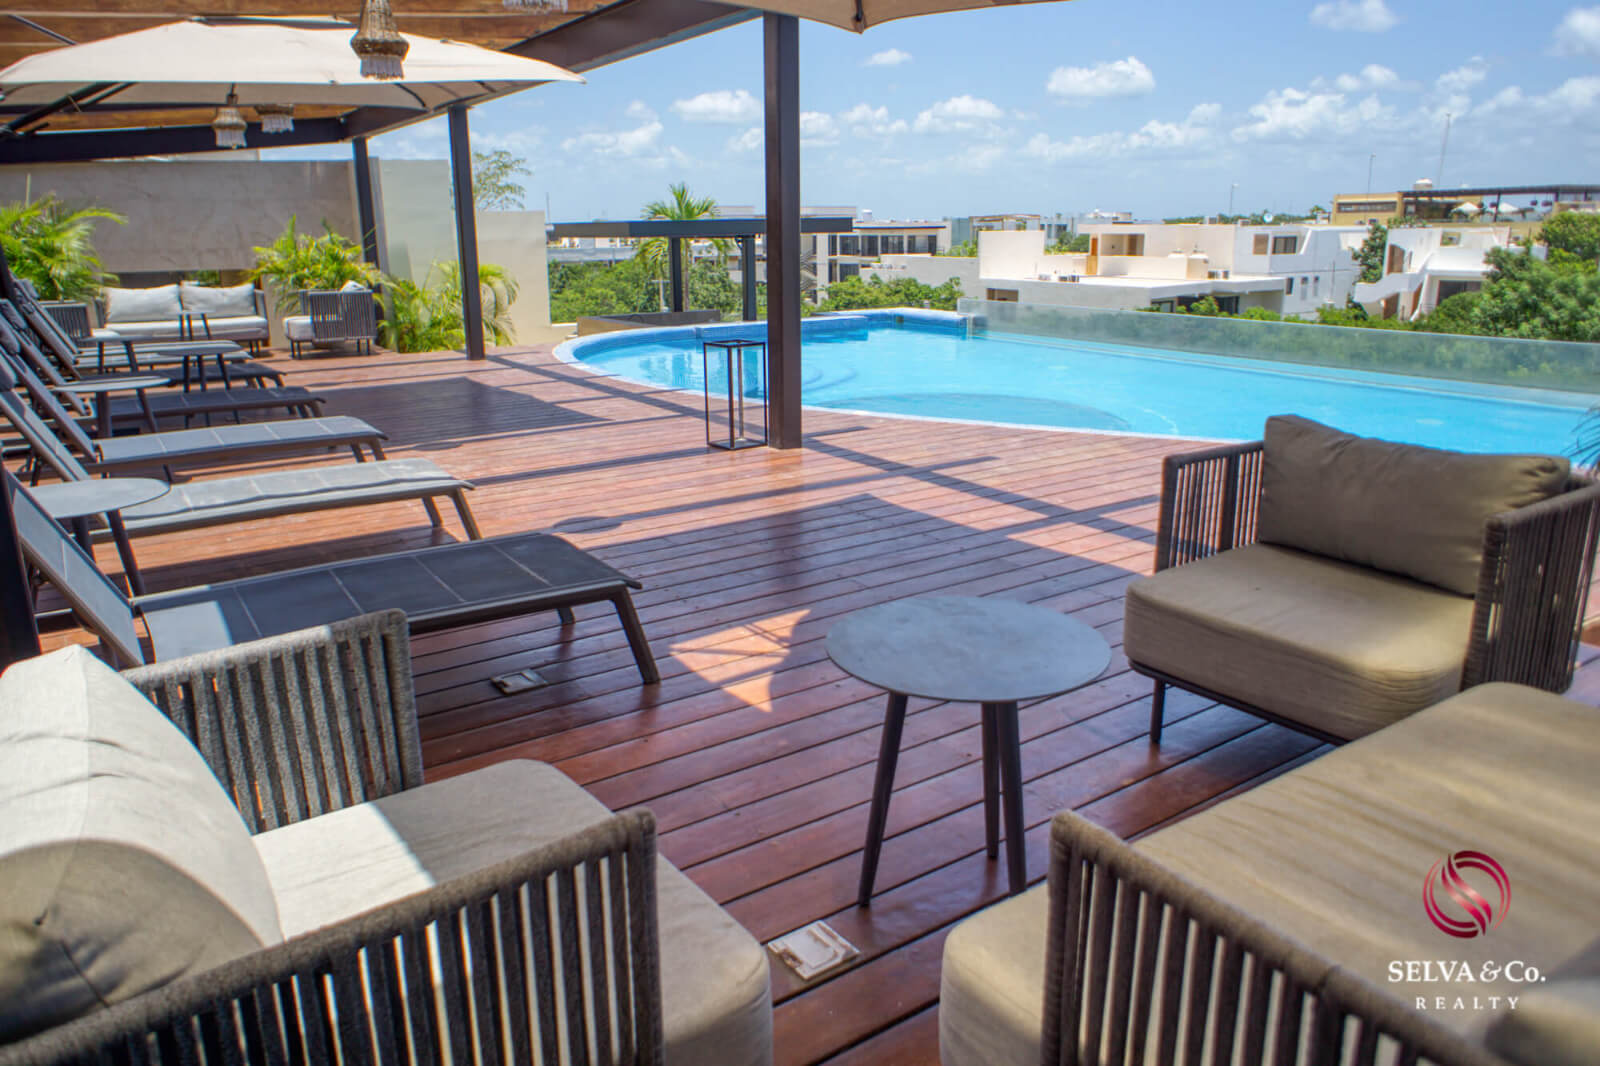 Condominium with pool for adults and rooftop bar, family pool, spa, co-working, gym, for pre-sale, Aldea Zama, Tulum.